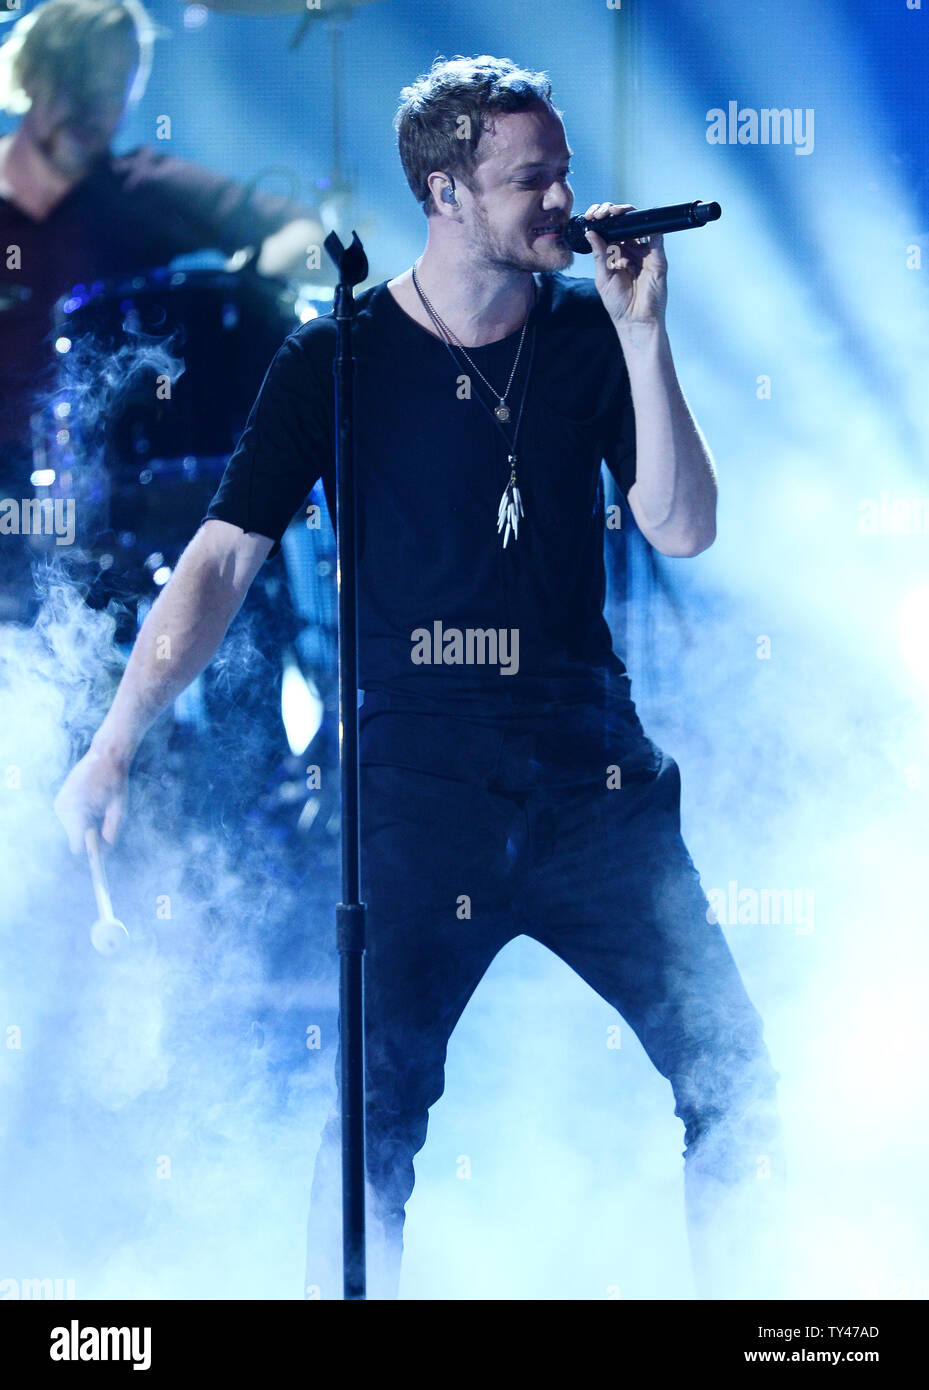 Singer Dan Reynolds Of Imagine Dragons Performs Onstage At The 41st Annual American Music Awards Held